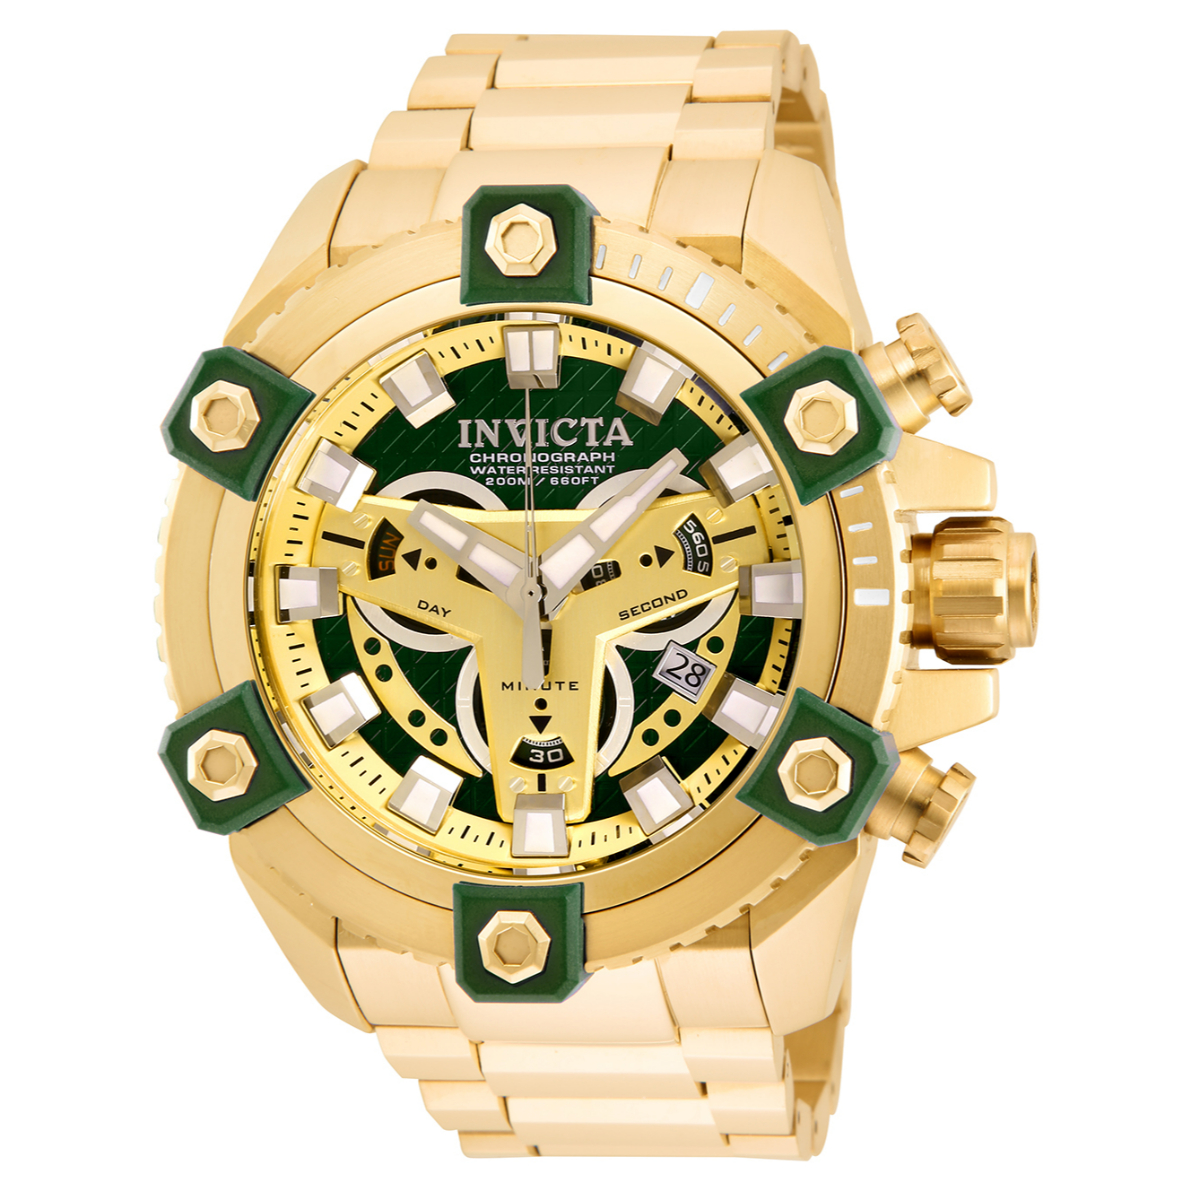 Invicta Coalition Forces Men's Watch - 56mm, Gold (ZG-29018)